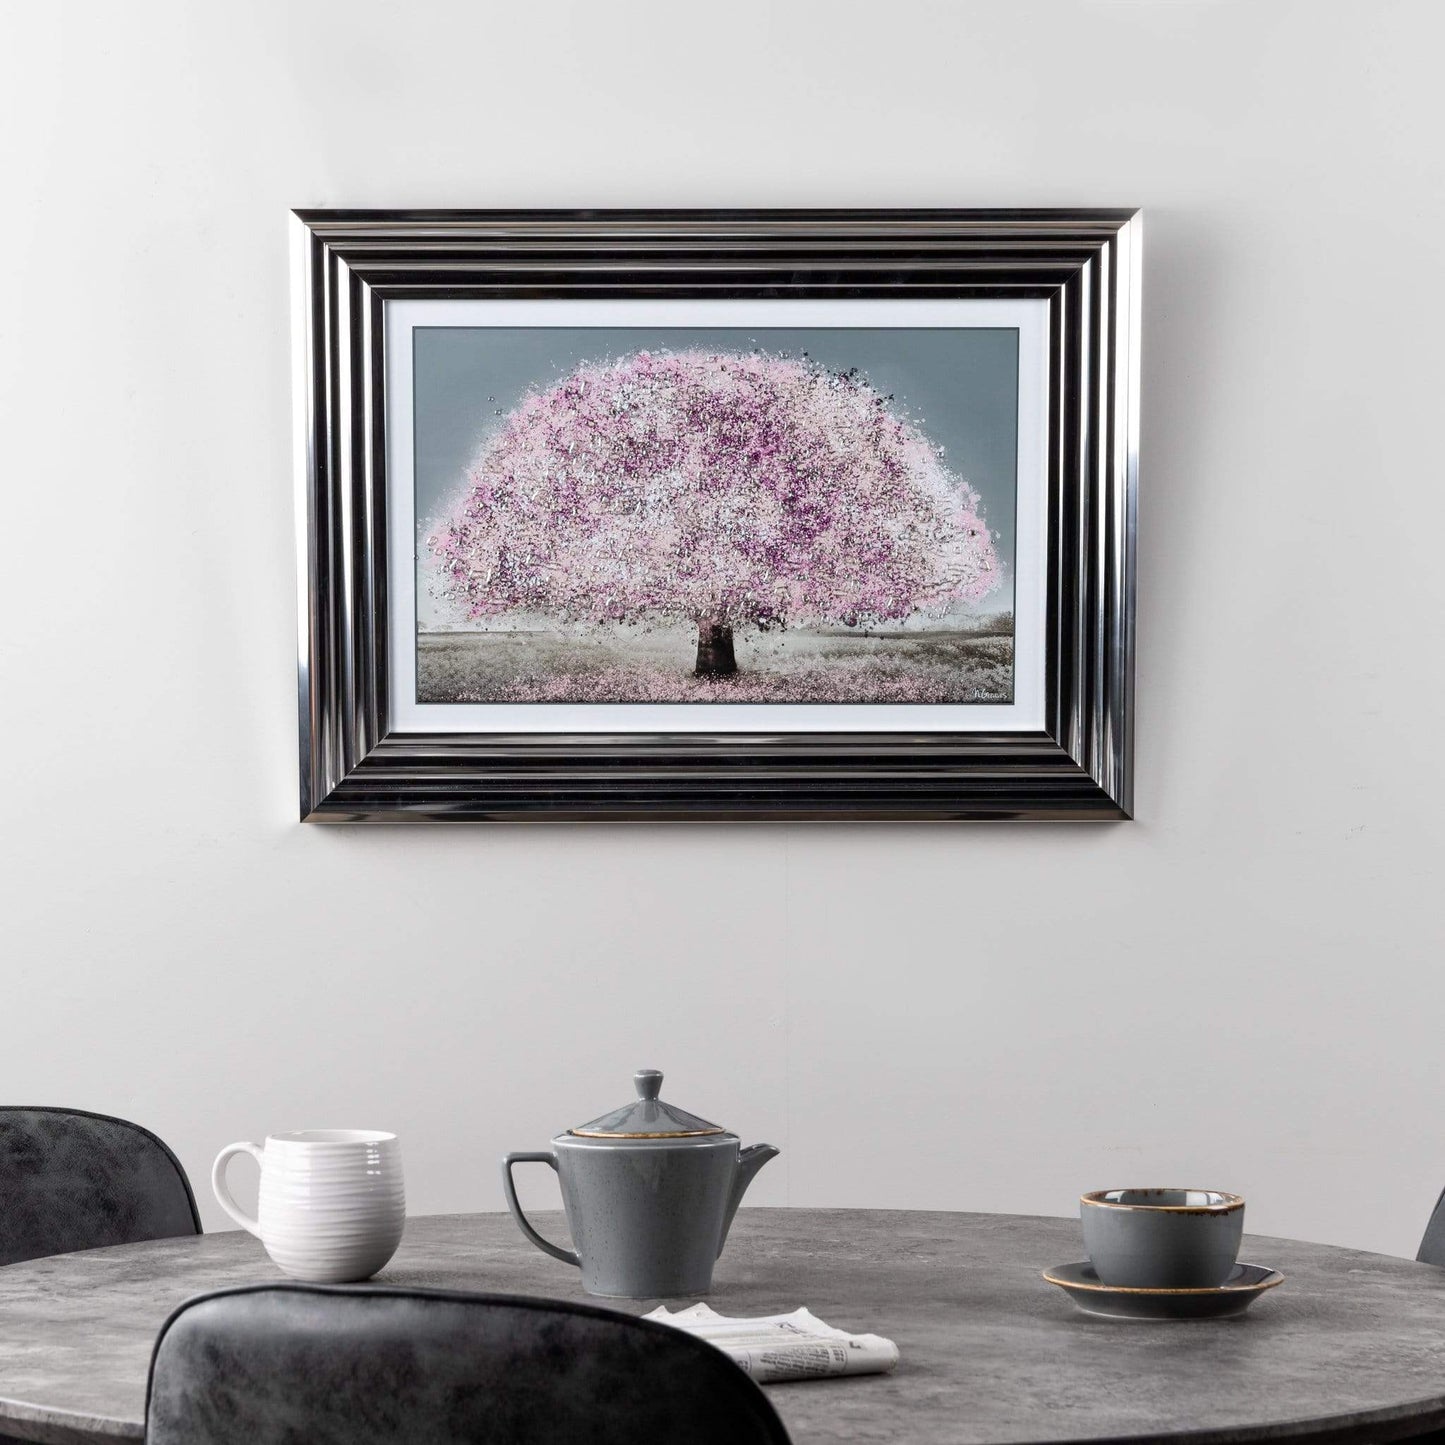 Pictures  -  Shh Blush Blossom Tree Framed Picture 55 X 75  -  50147142